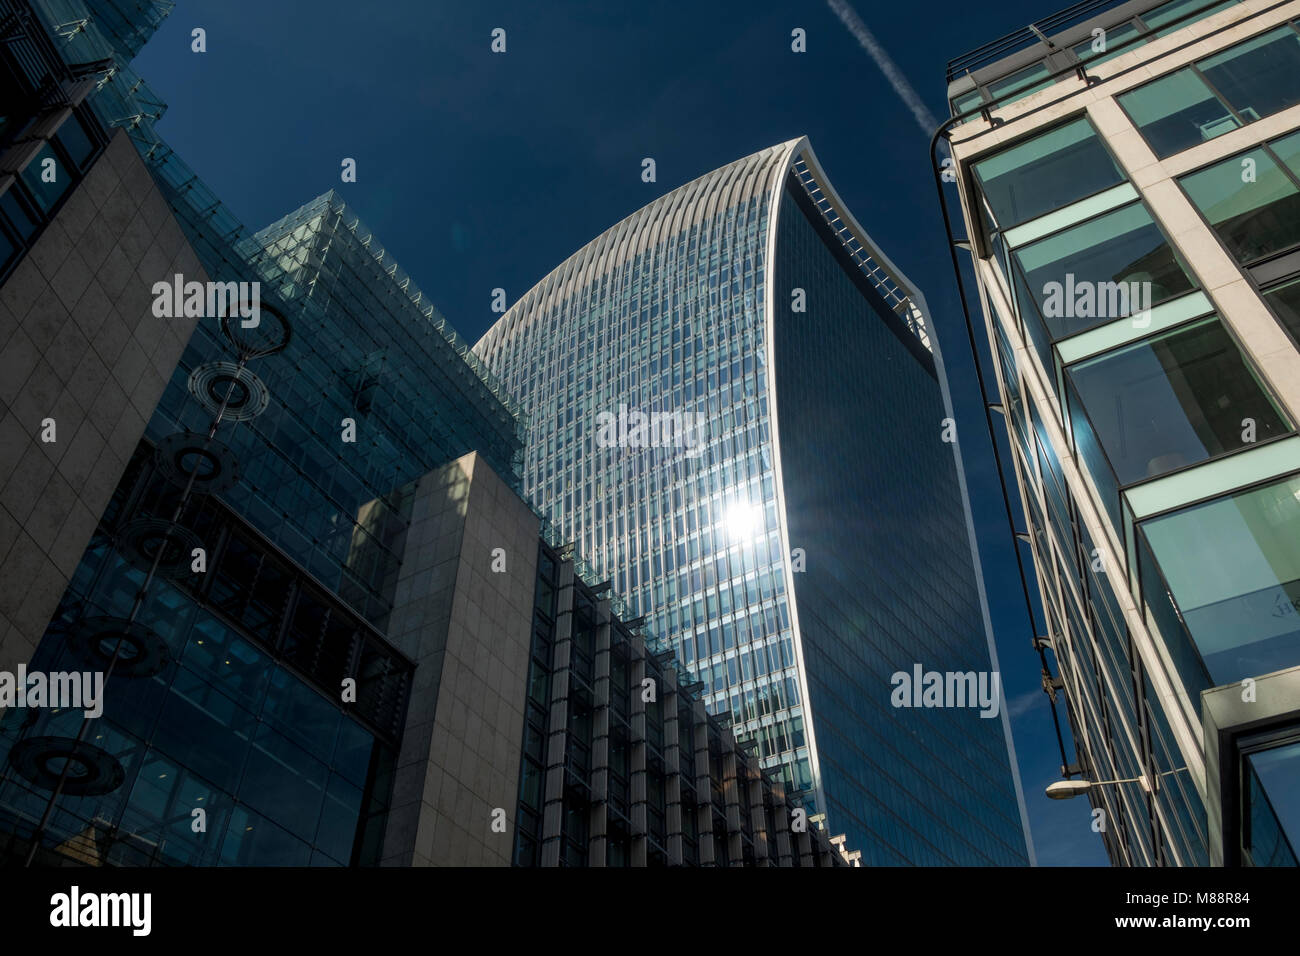 Shot looking directly up at the Walkie Talkie Building from Fenchurch Street London. Stock Photo